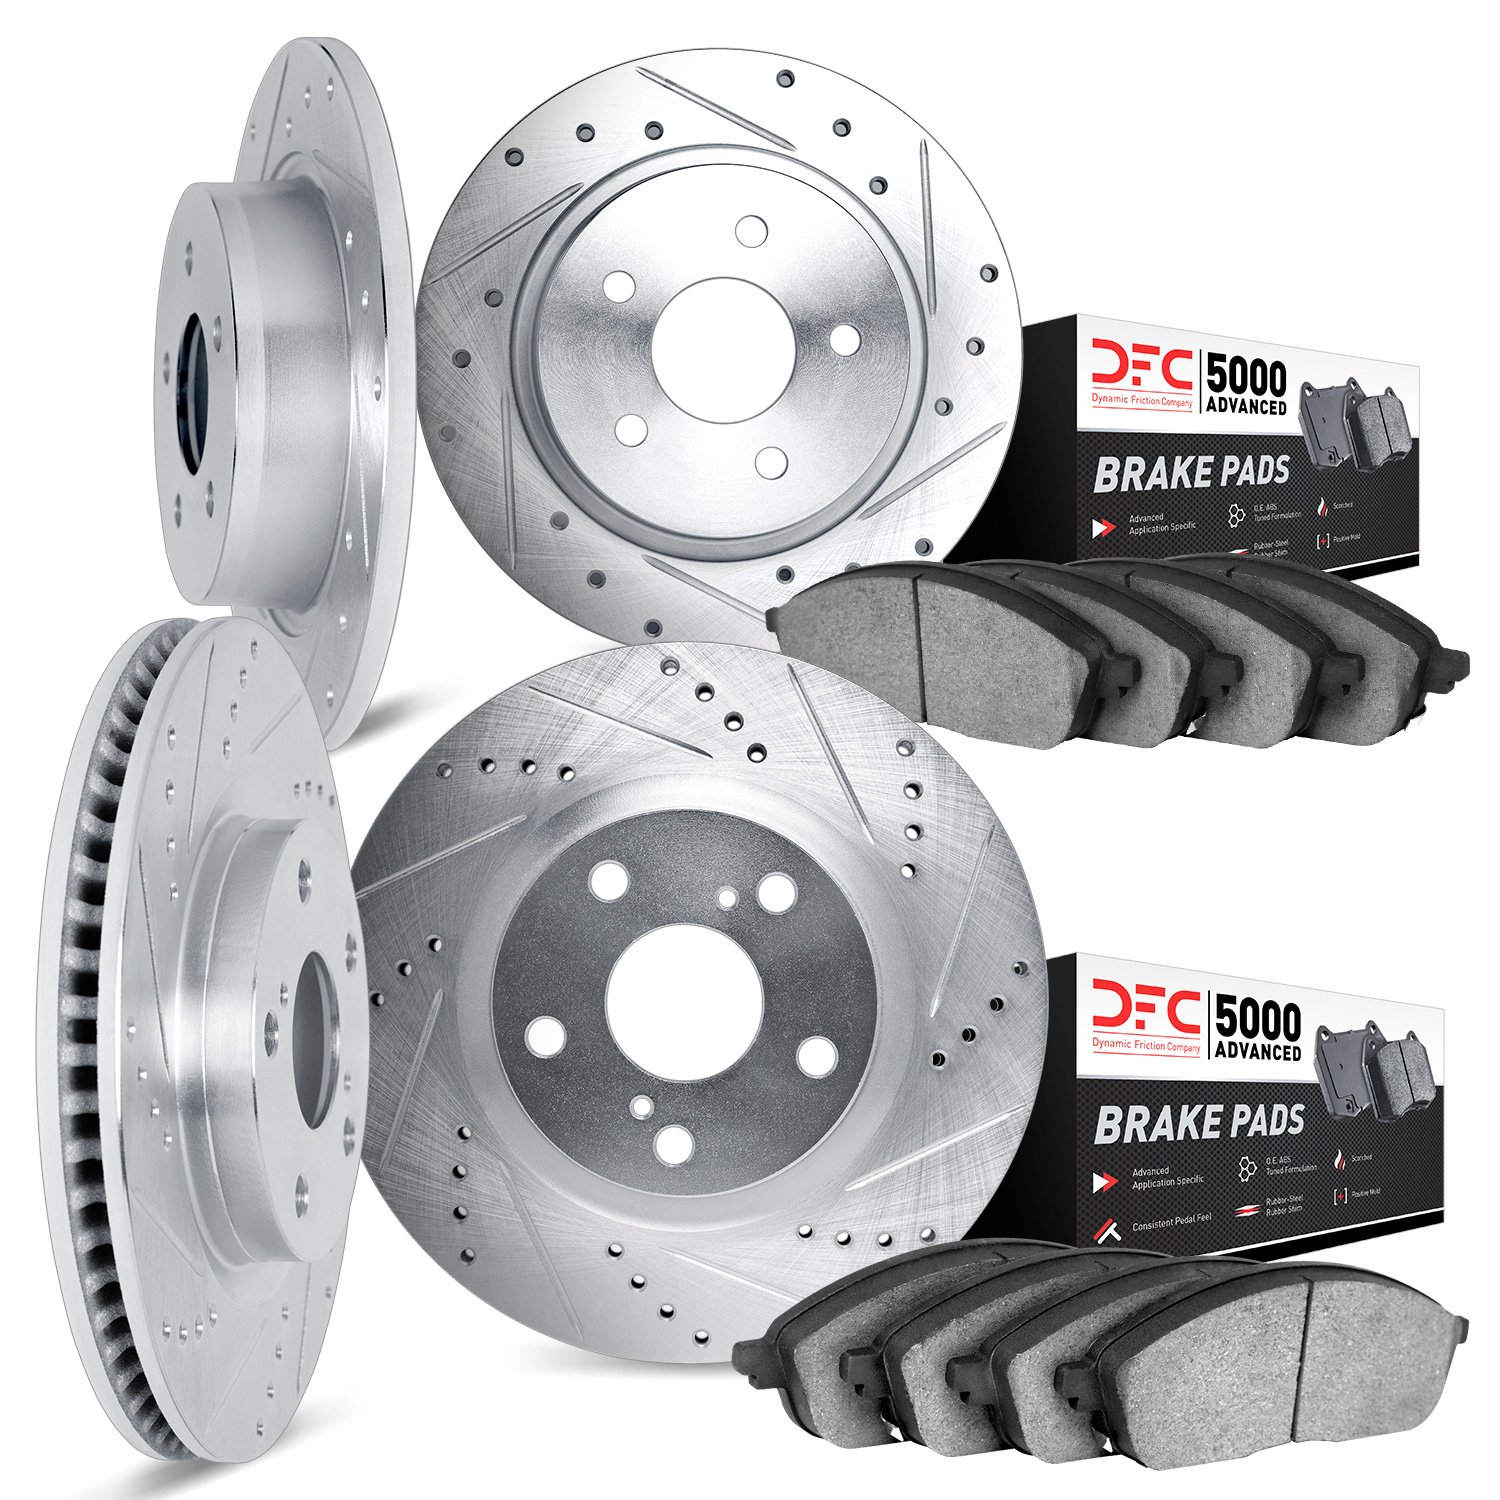 7504-72046 Drilled/Slotted Brake Rotors w/5000 Advanced Brake Pads Kit [Silver], 2004-2012 Mitsubishi, Position: Front and Rear